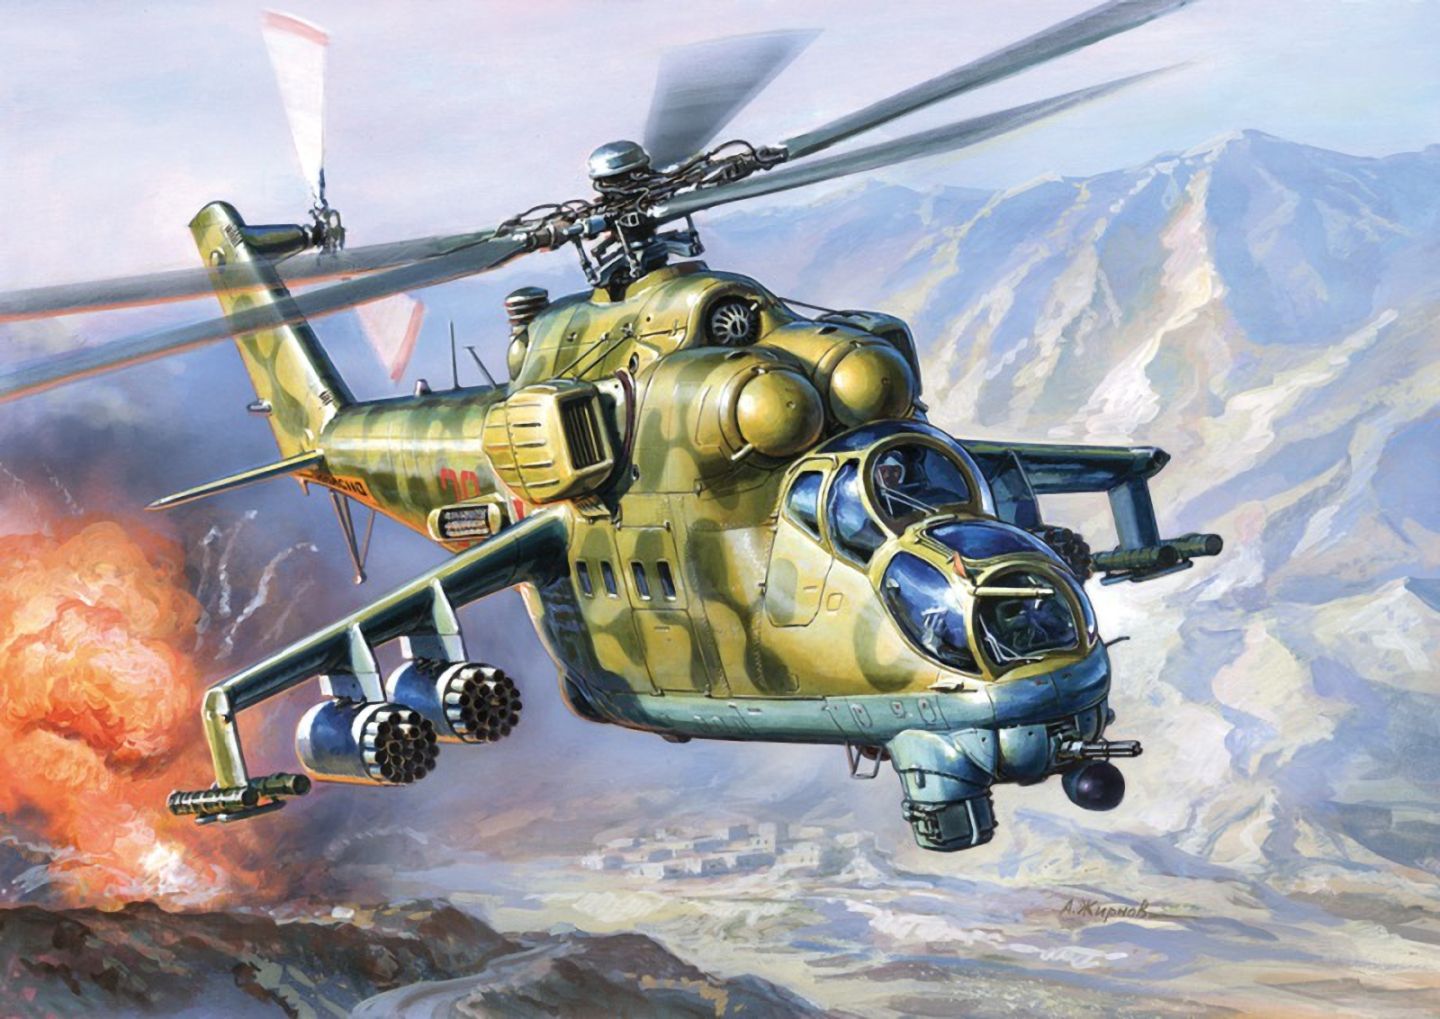 Desktop Wallpaper Helicopters Painting Art Army